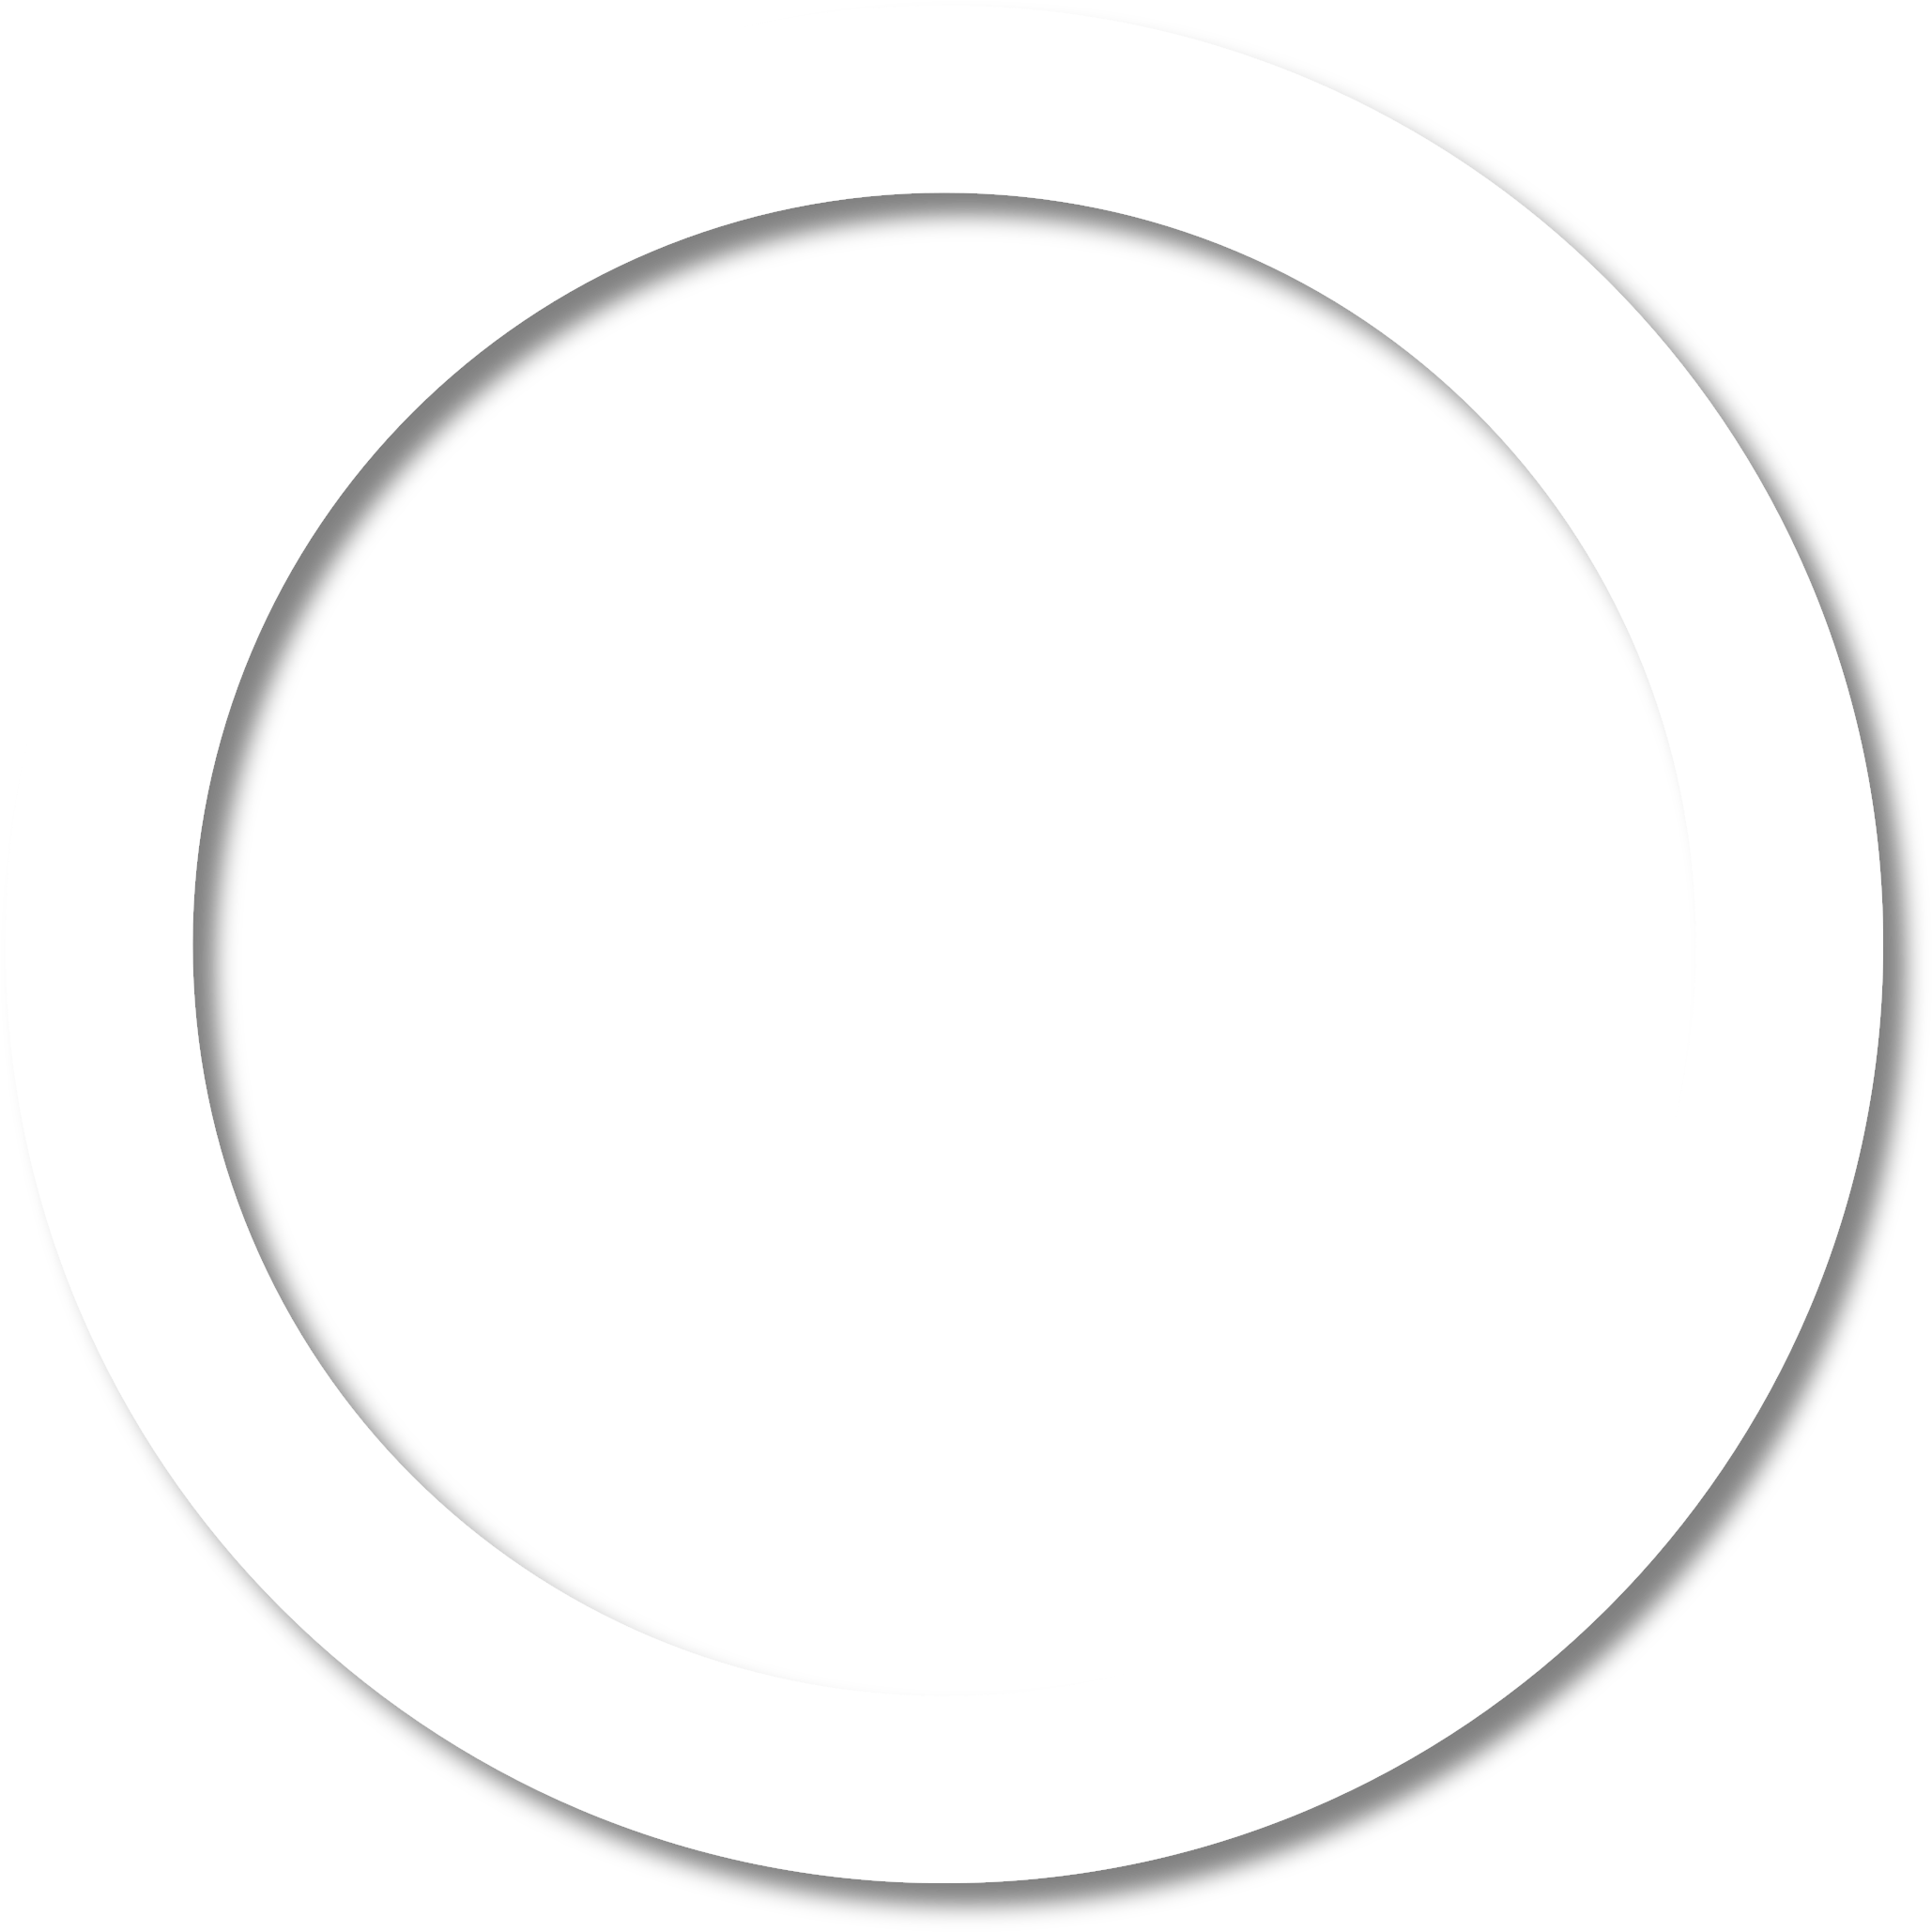 White Circle Outline Png Www Imgkid Com The Image Kid.